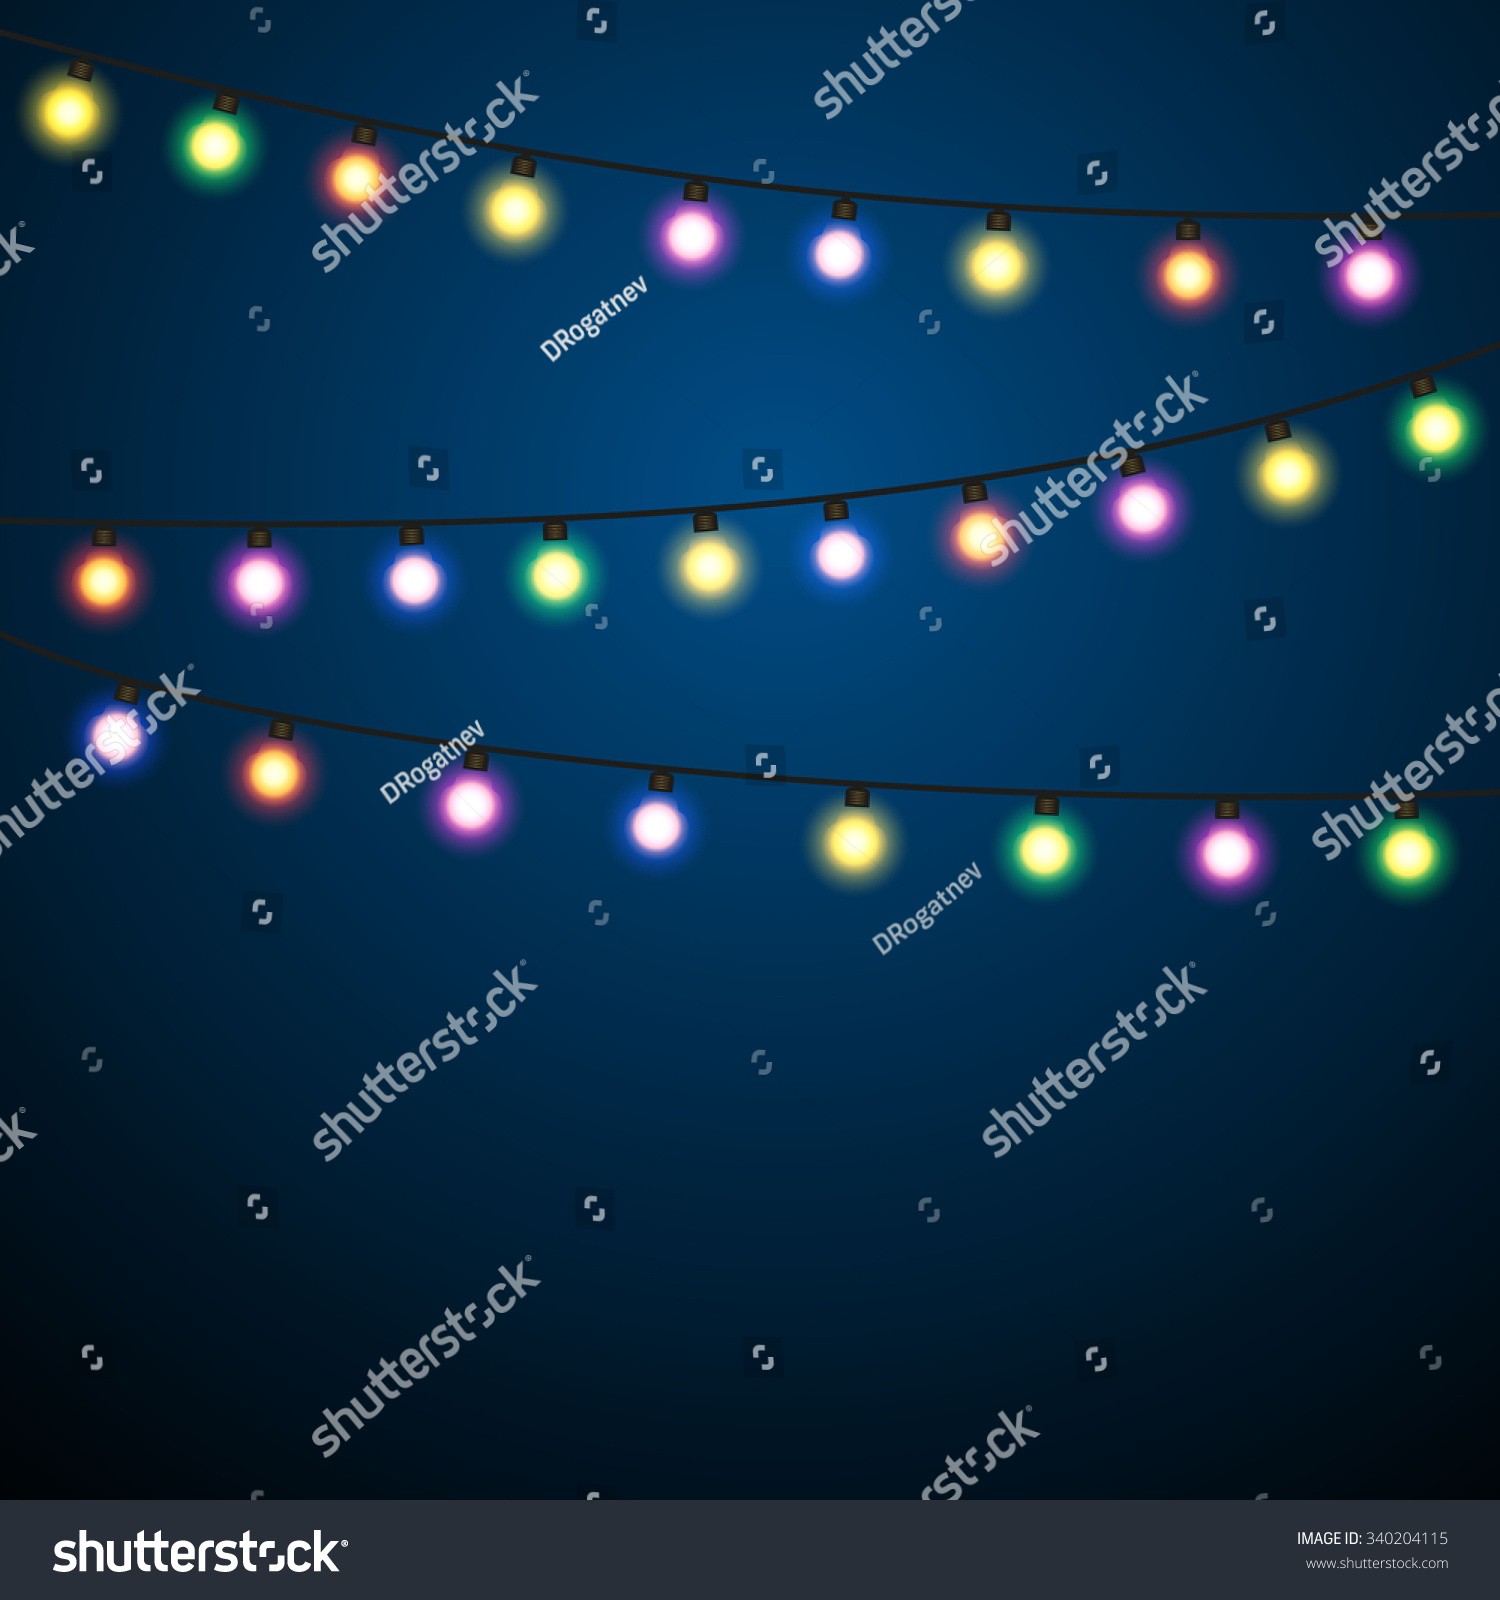 Glowing Lights - Colorful Fairy Lights Background. Christmas Lights ...